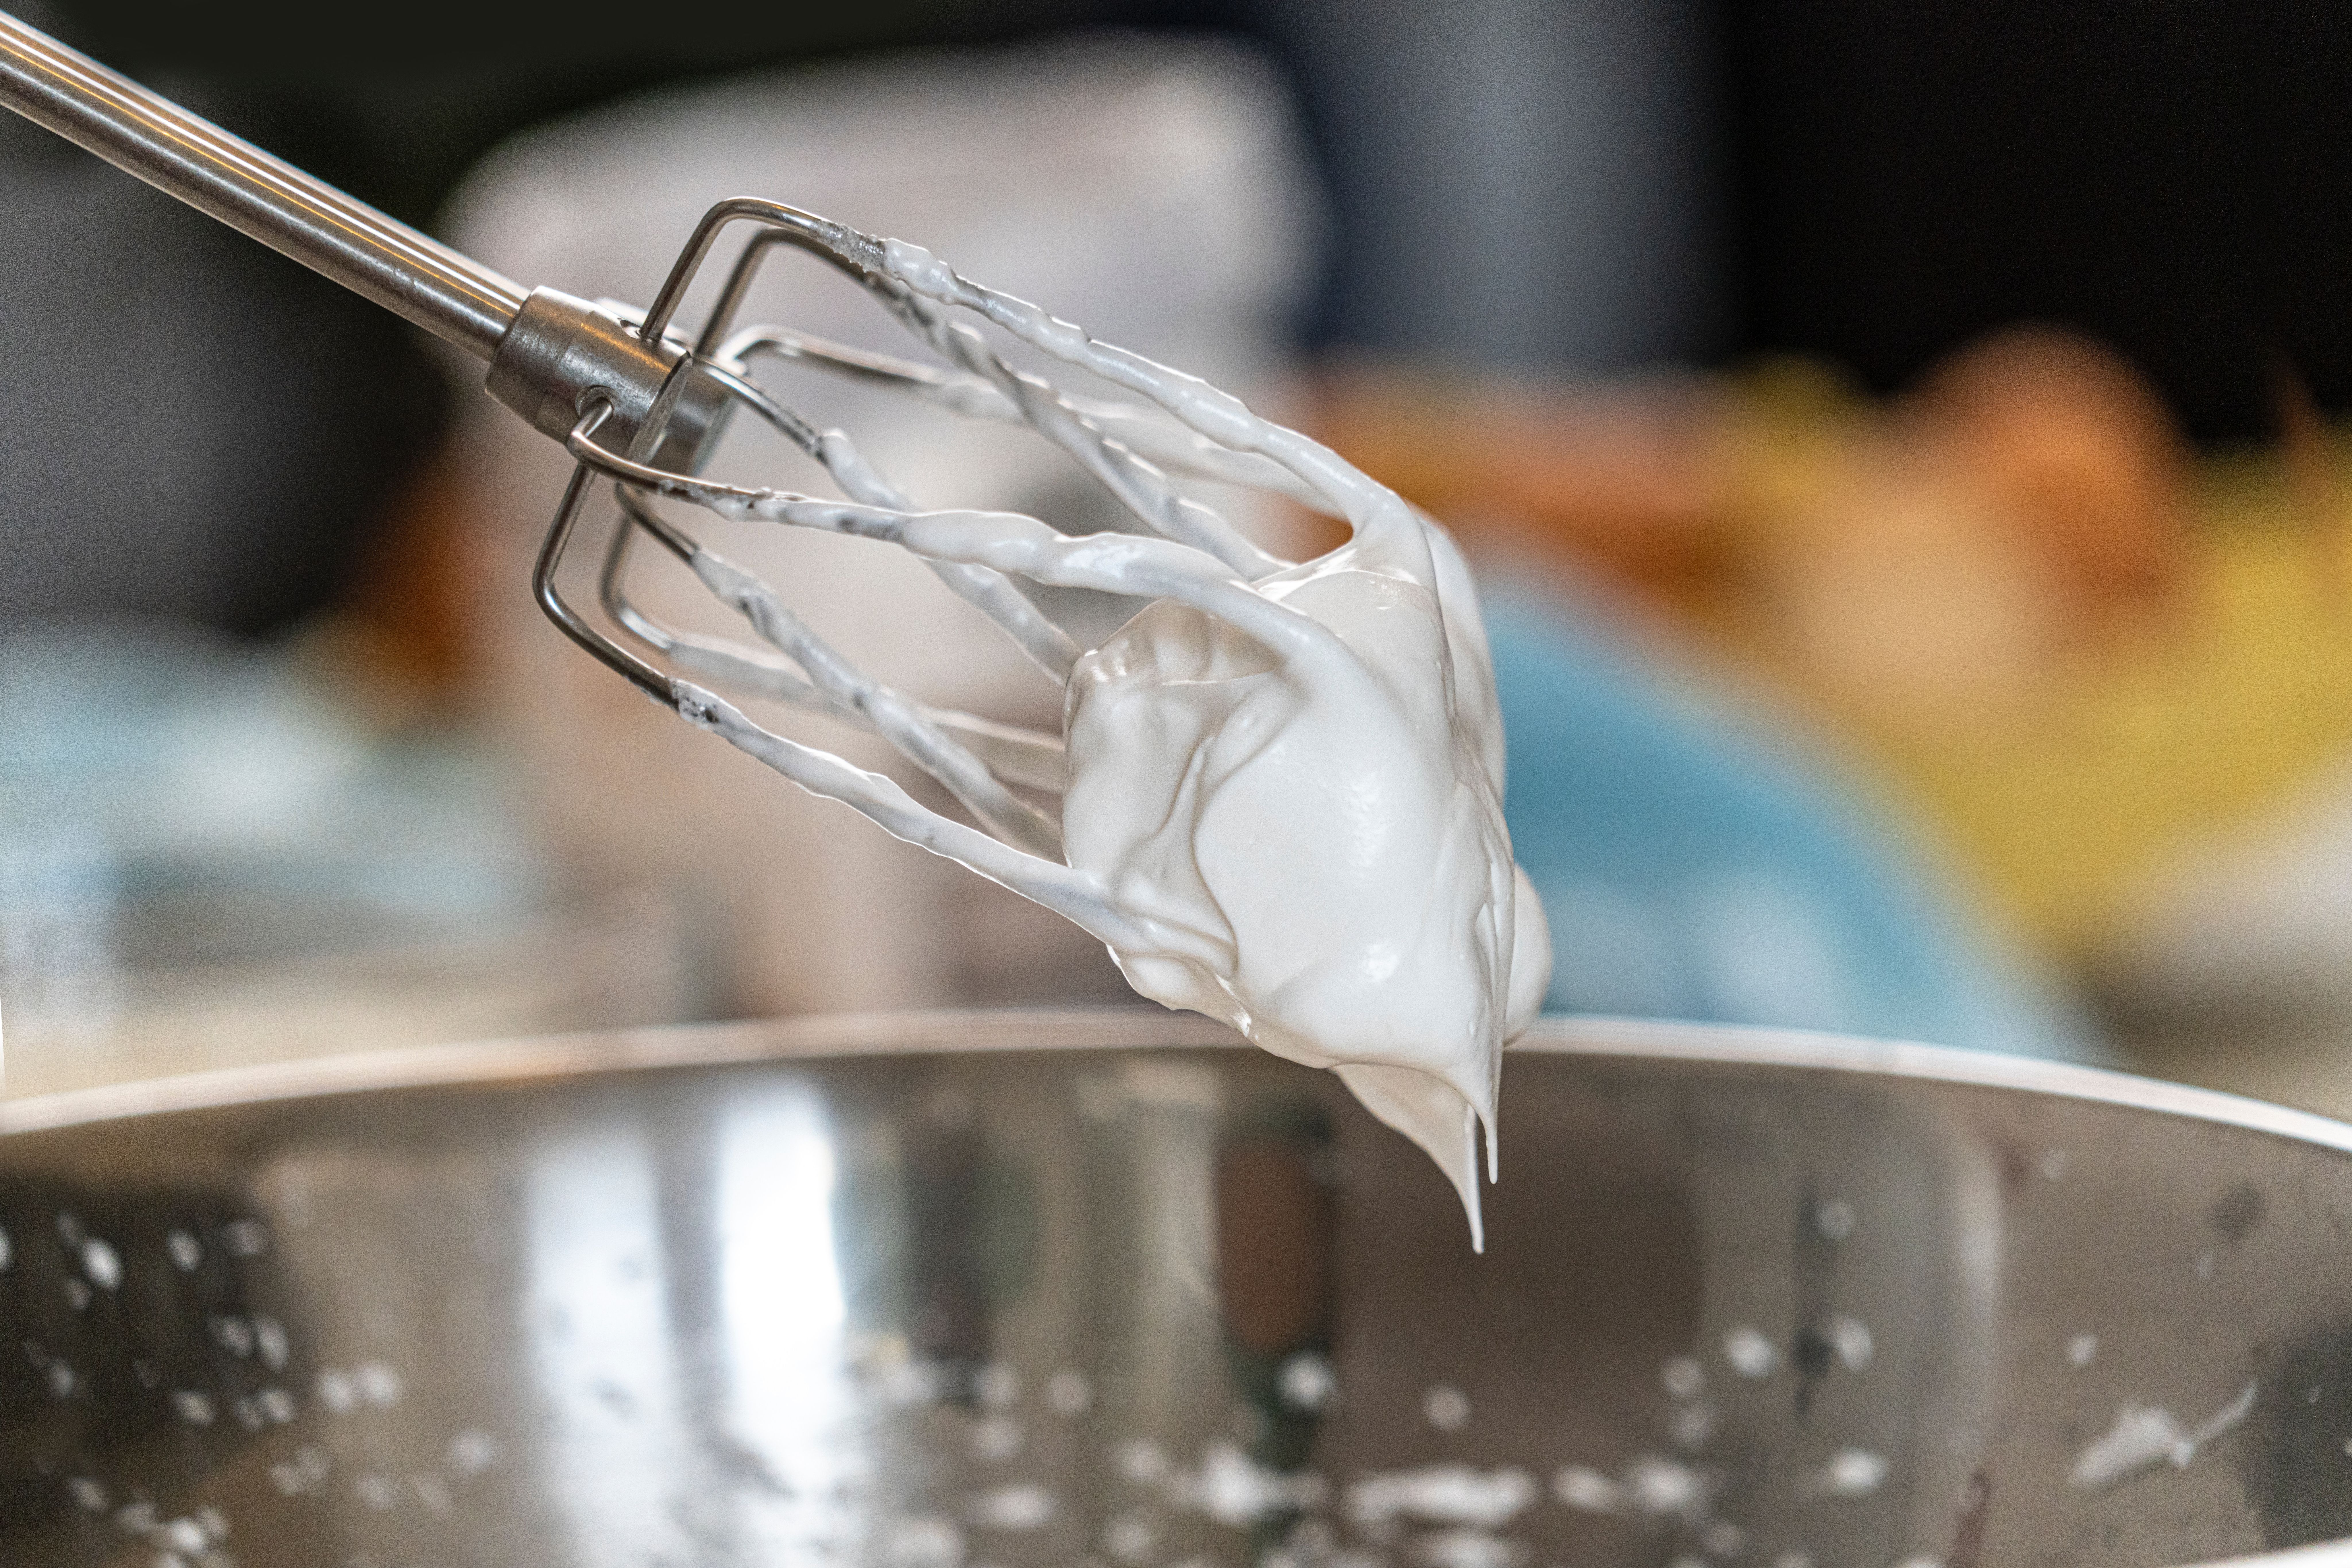 The whisks of a mixer with some cream dripping from it